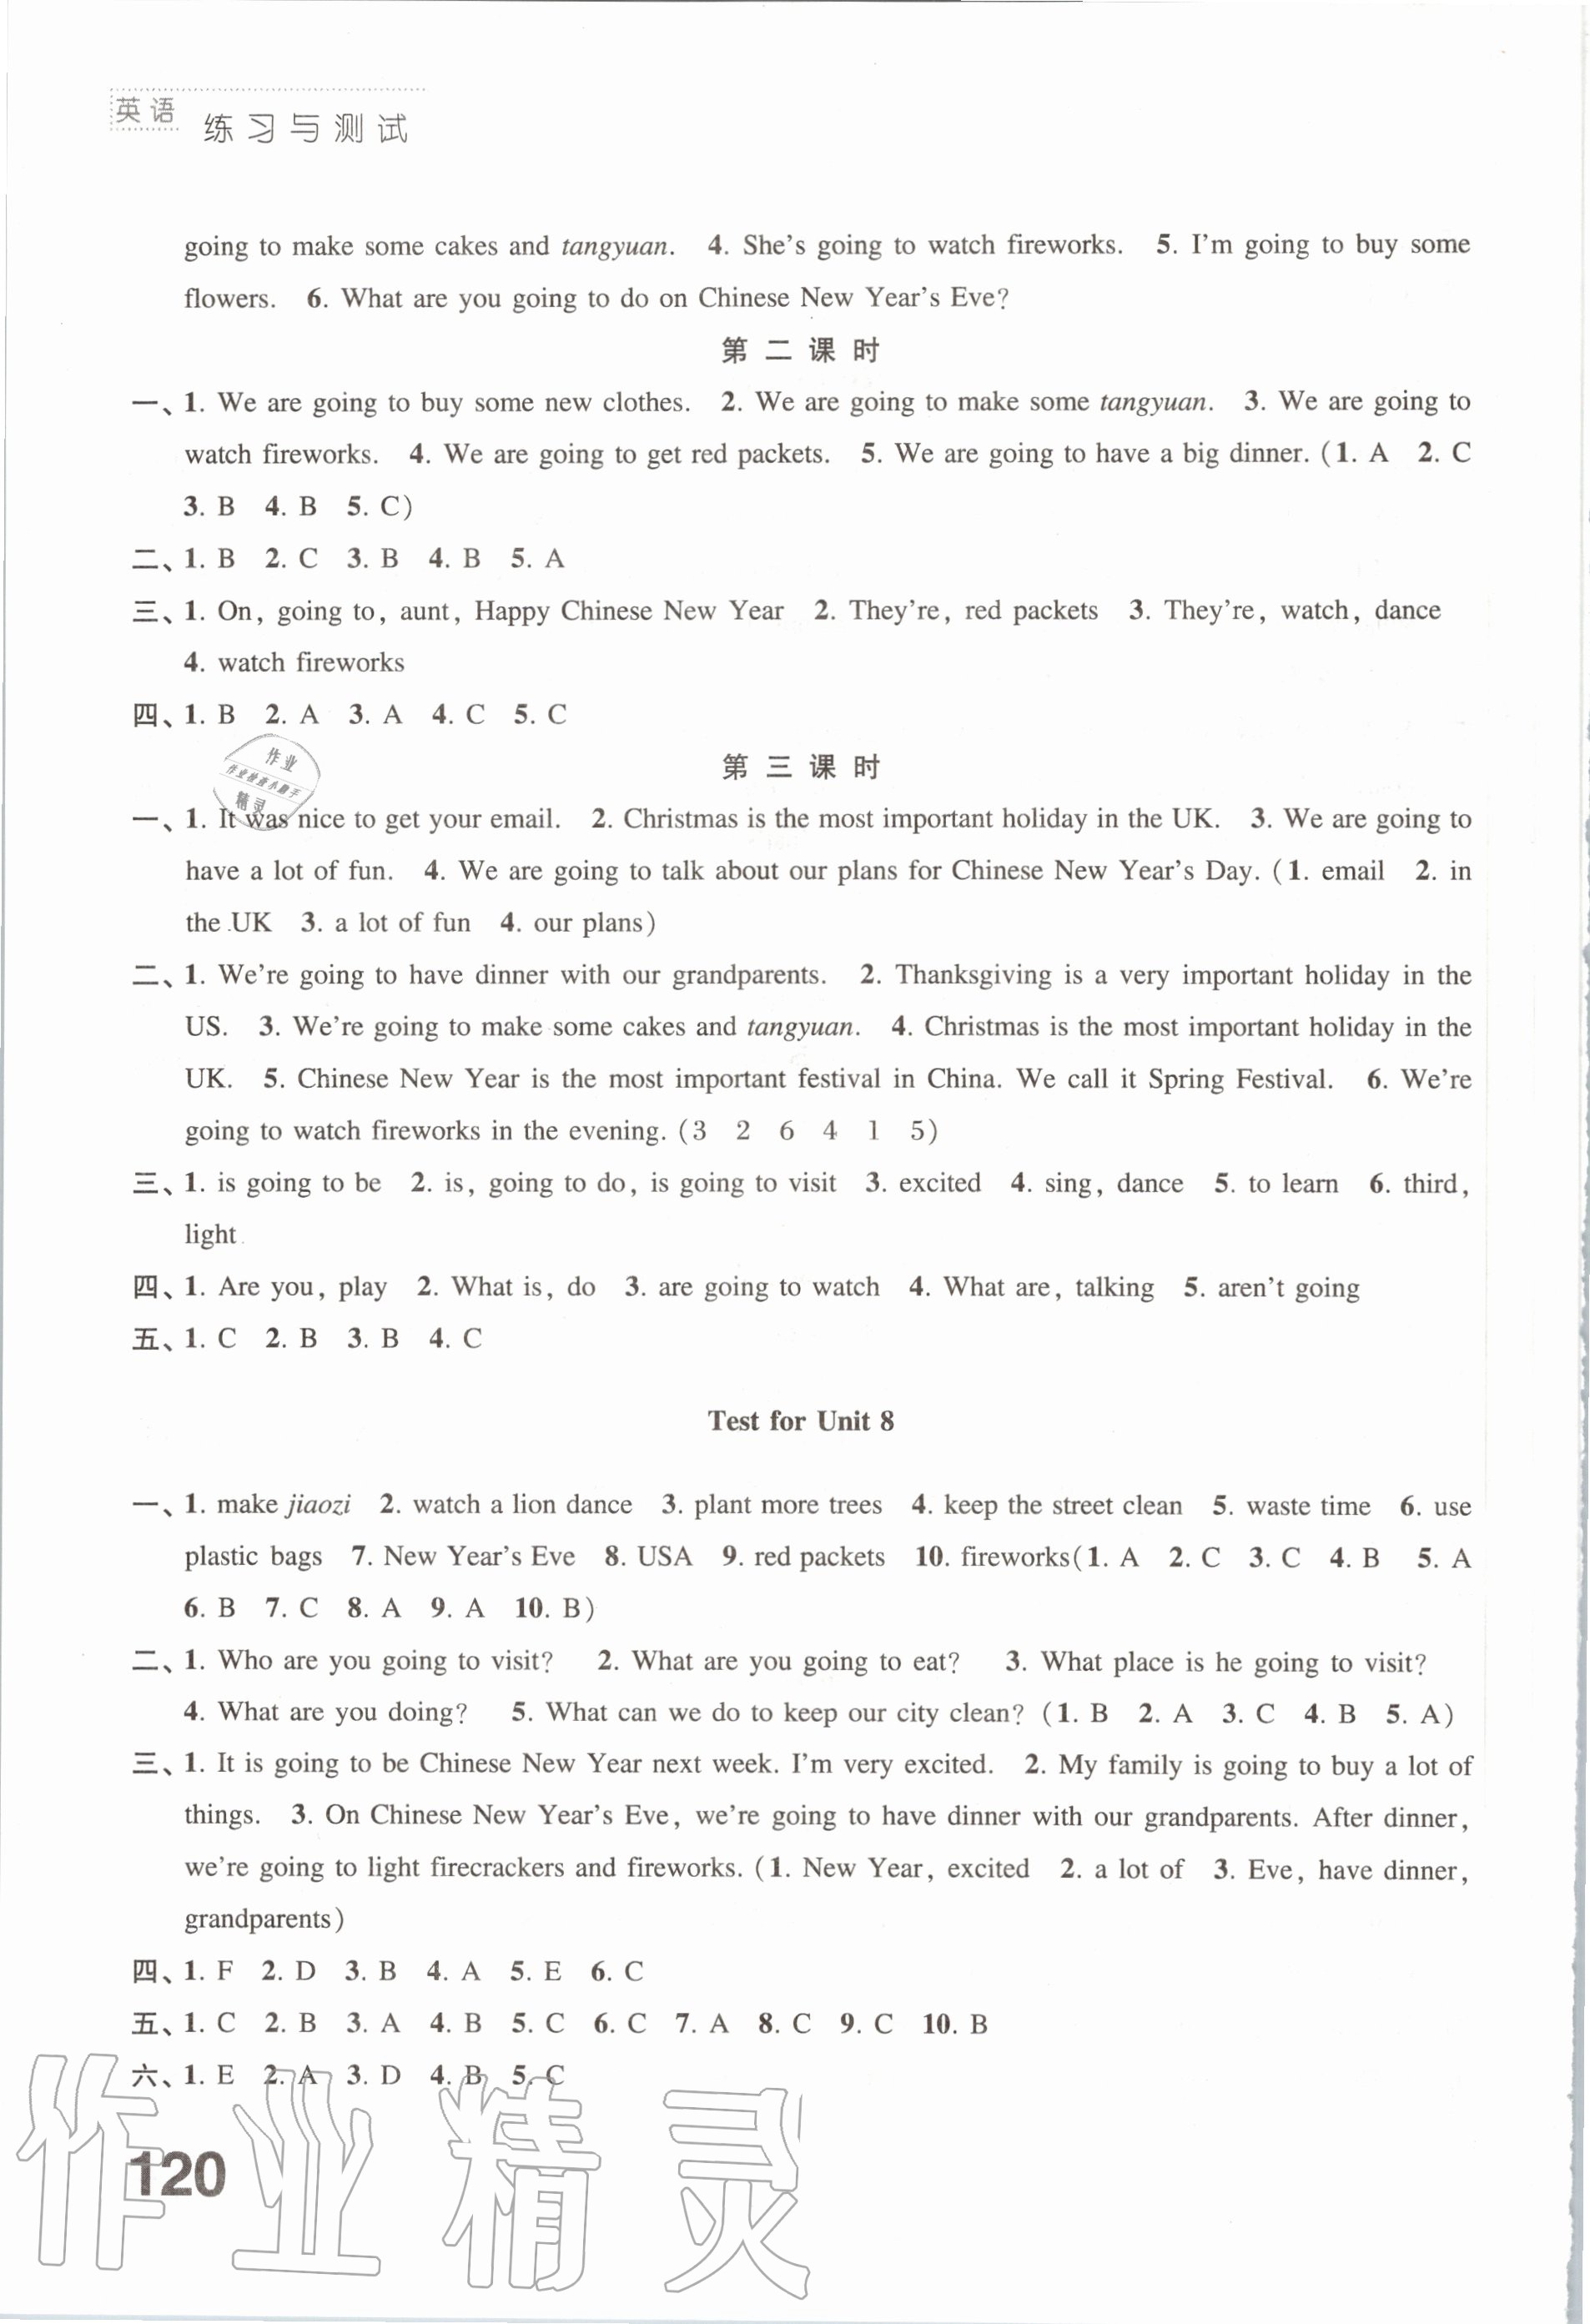 Test for Unit 8 - 第14页